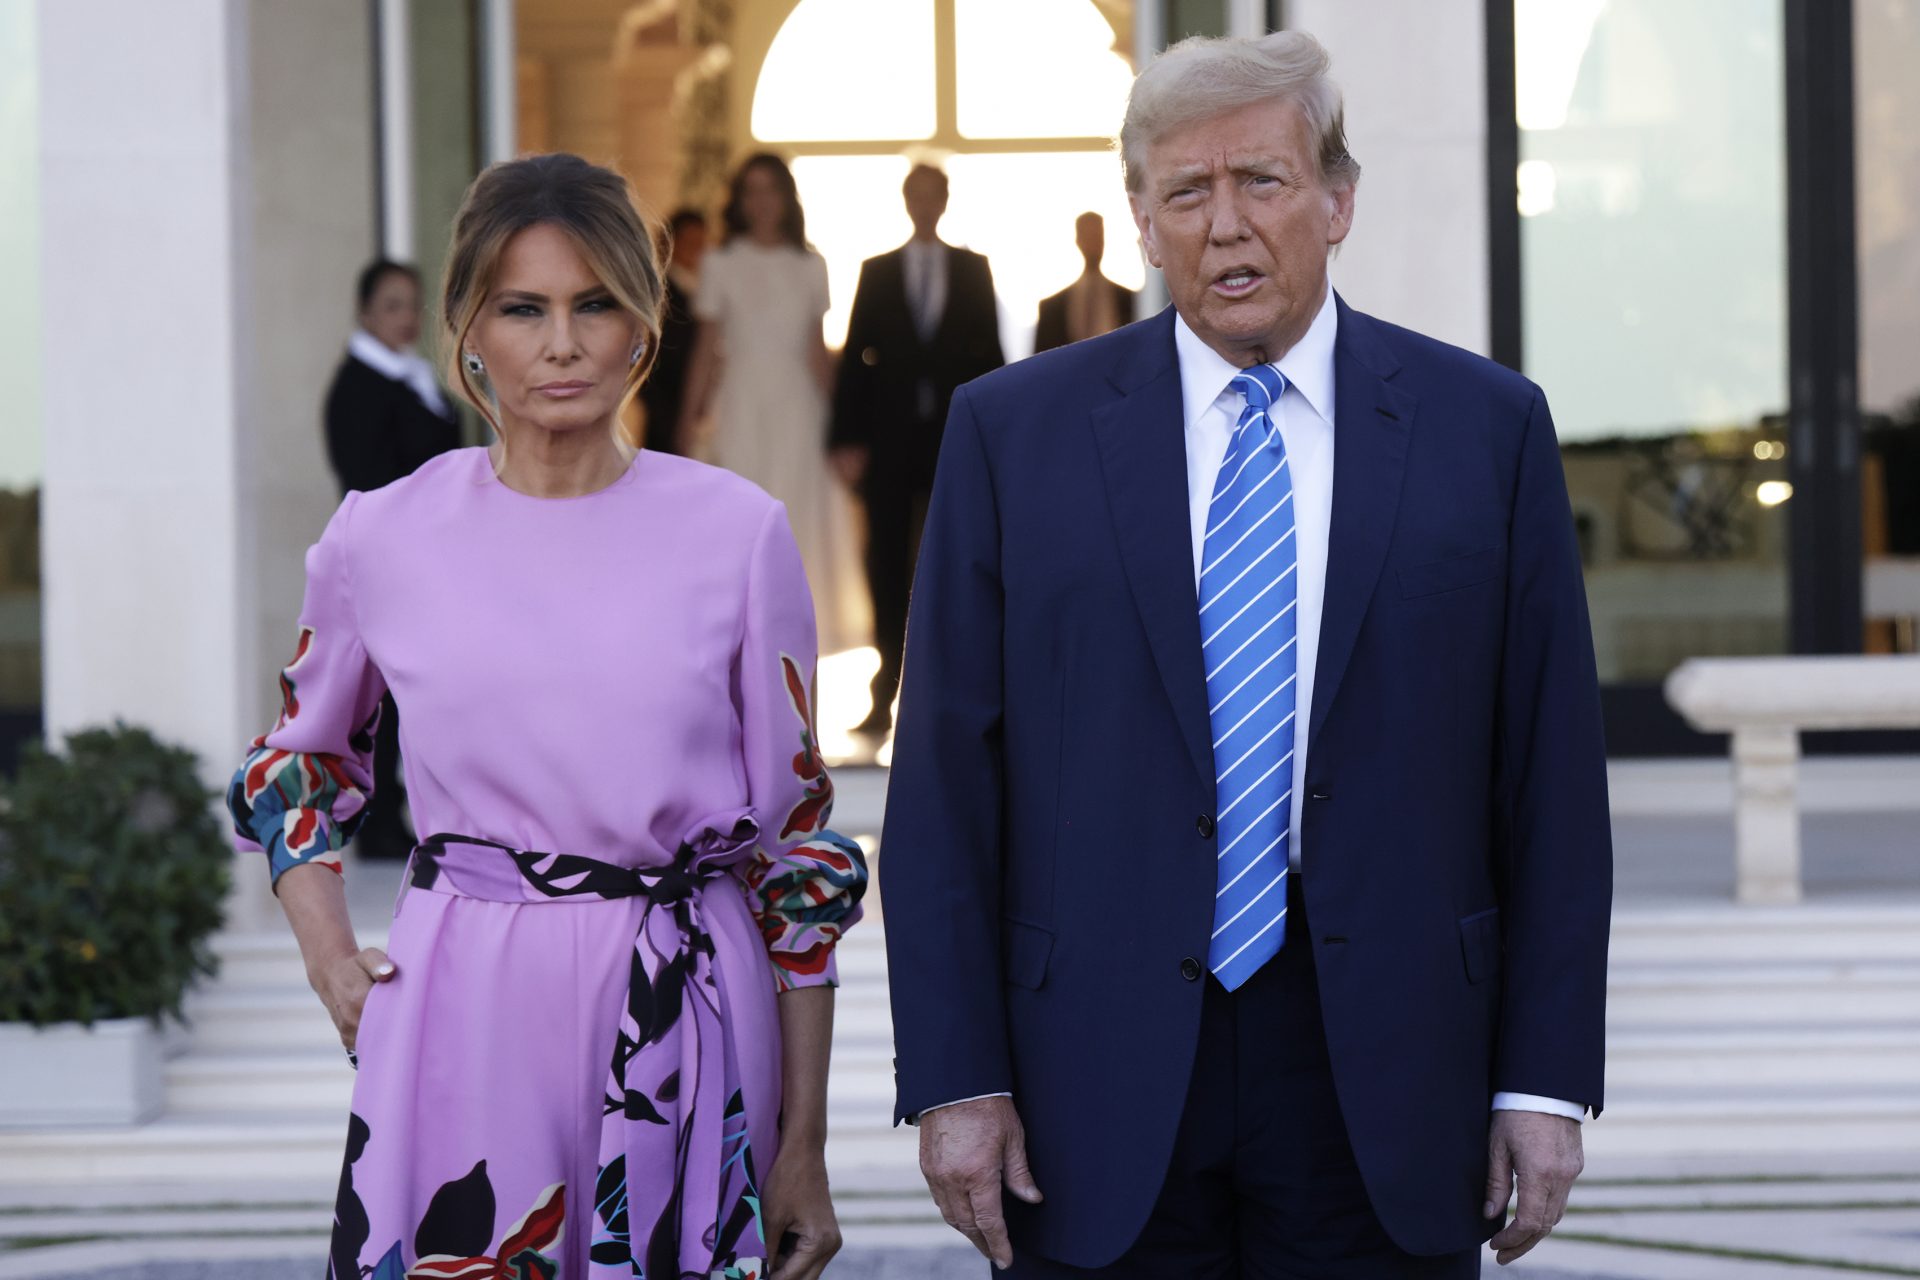 Melania won’t be heading back to the White House if Trump wins report suggests